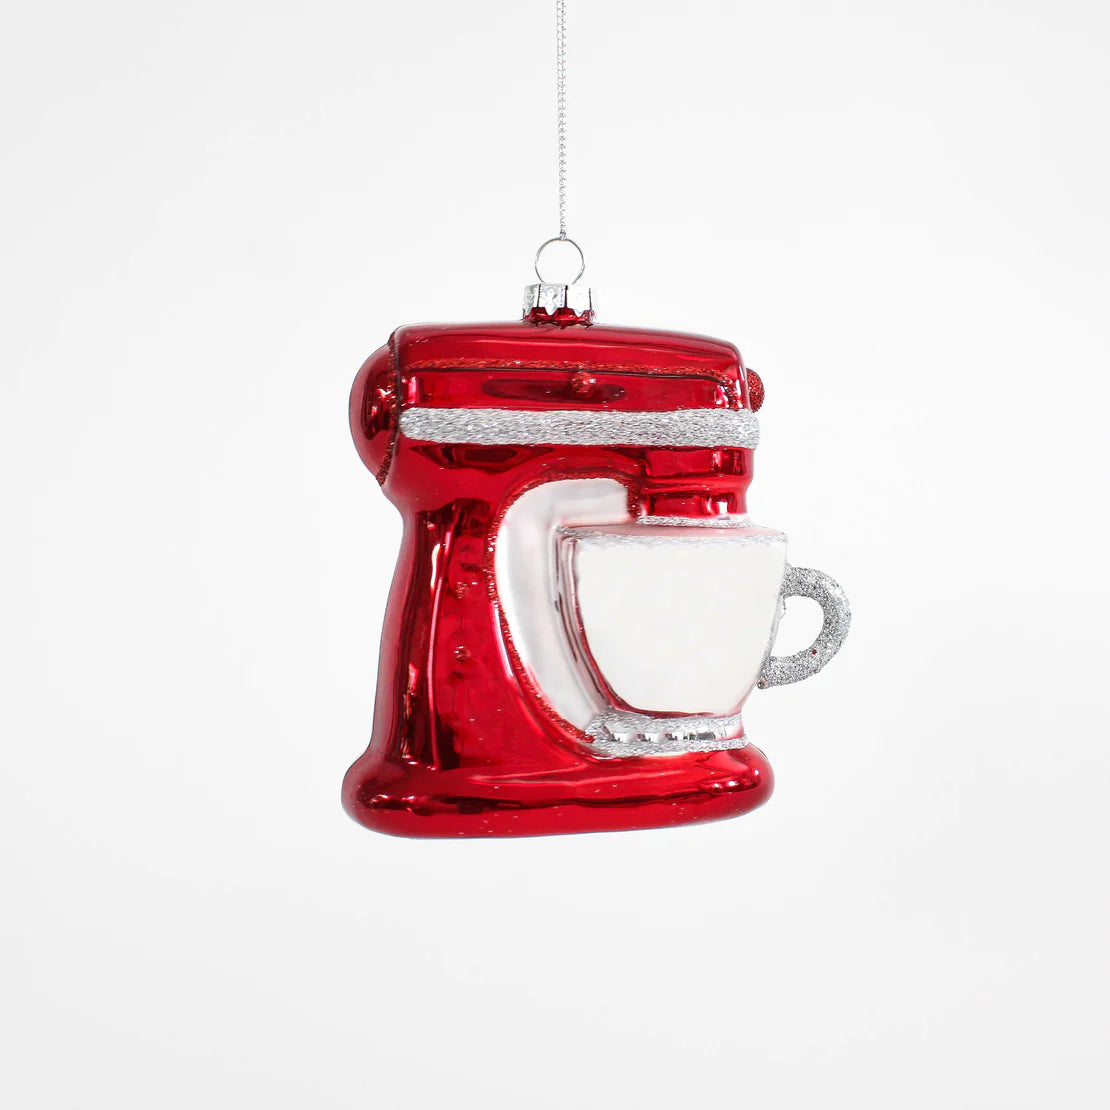 Red Stand Mixer Ornament